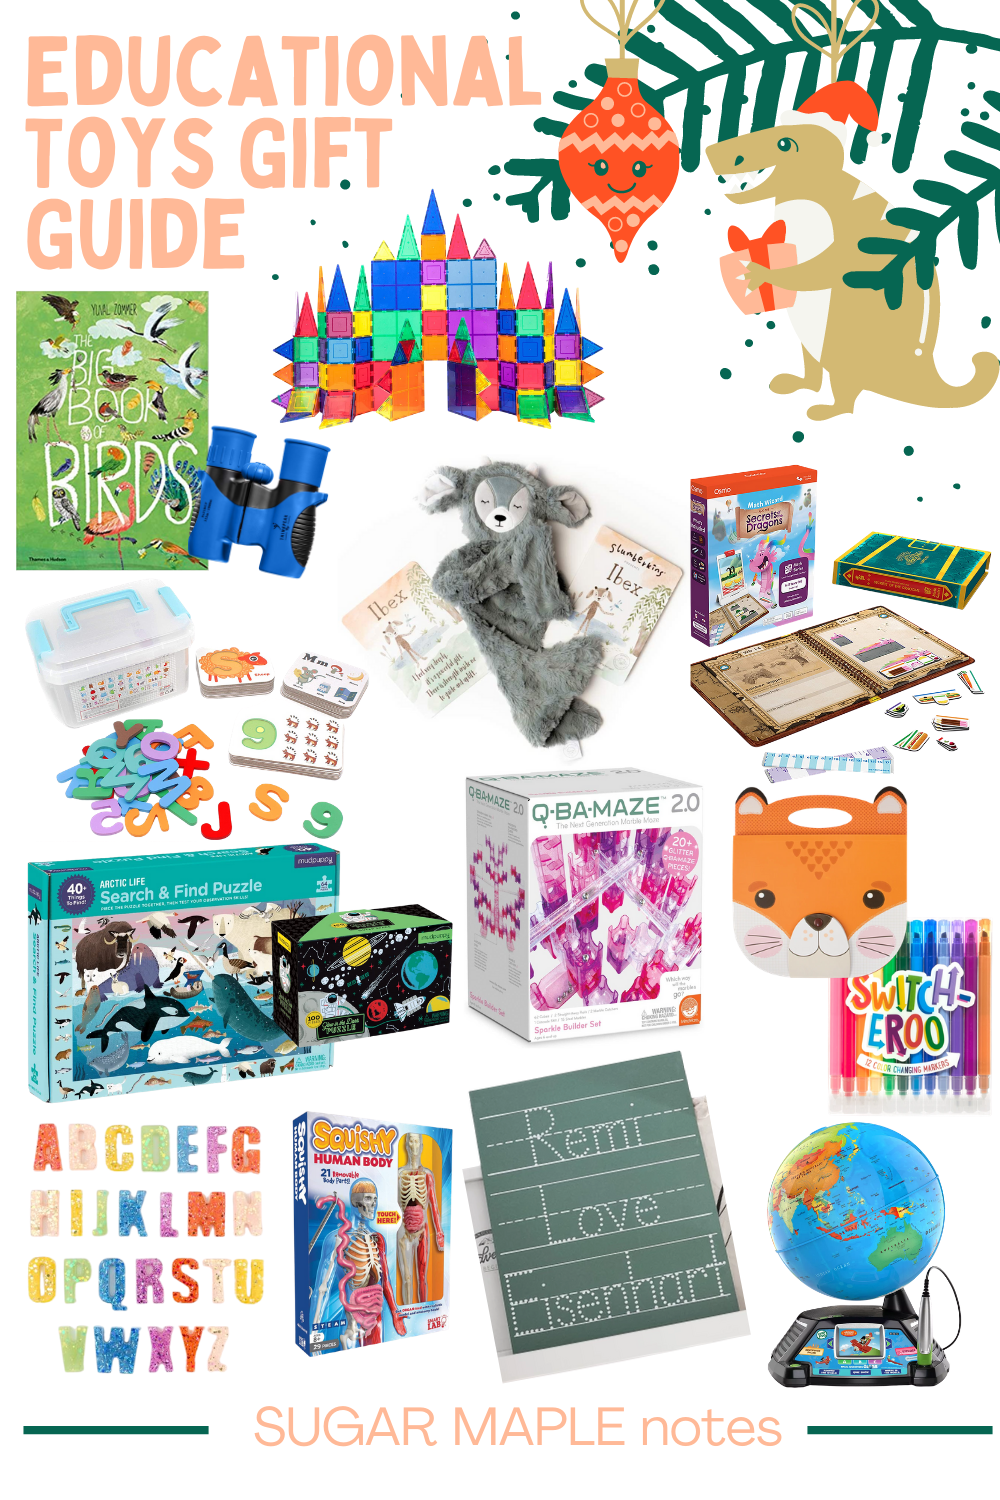 Educational Toys Gift Guide for Kids Ages 3 - 6 #giftguide #kidsgiftguide #educationaltoys #boredombusters #kidsgifts #christmasgifts